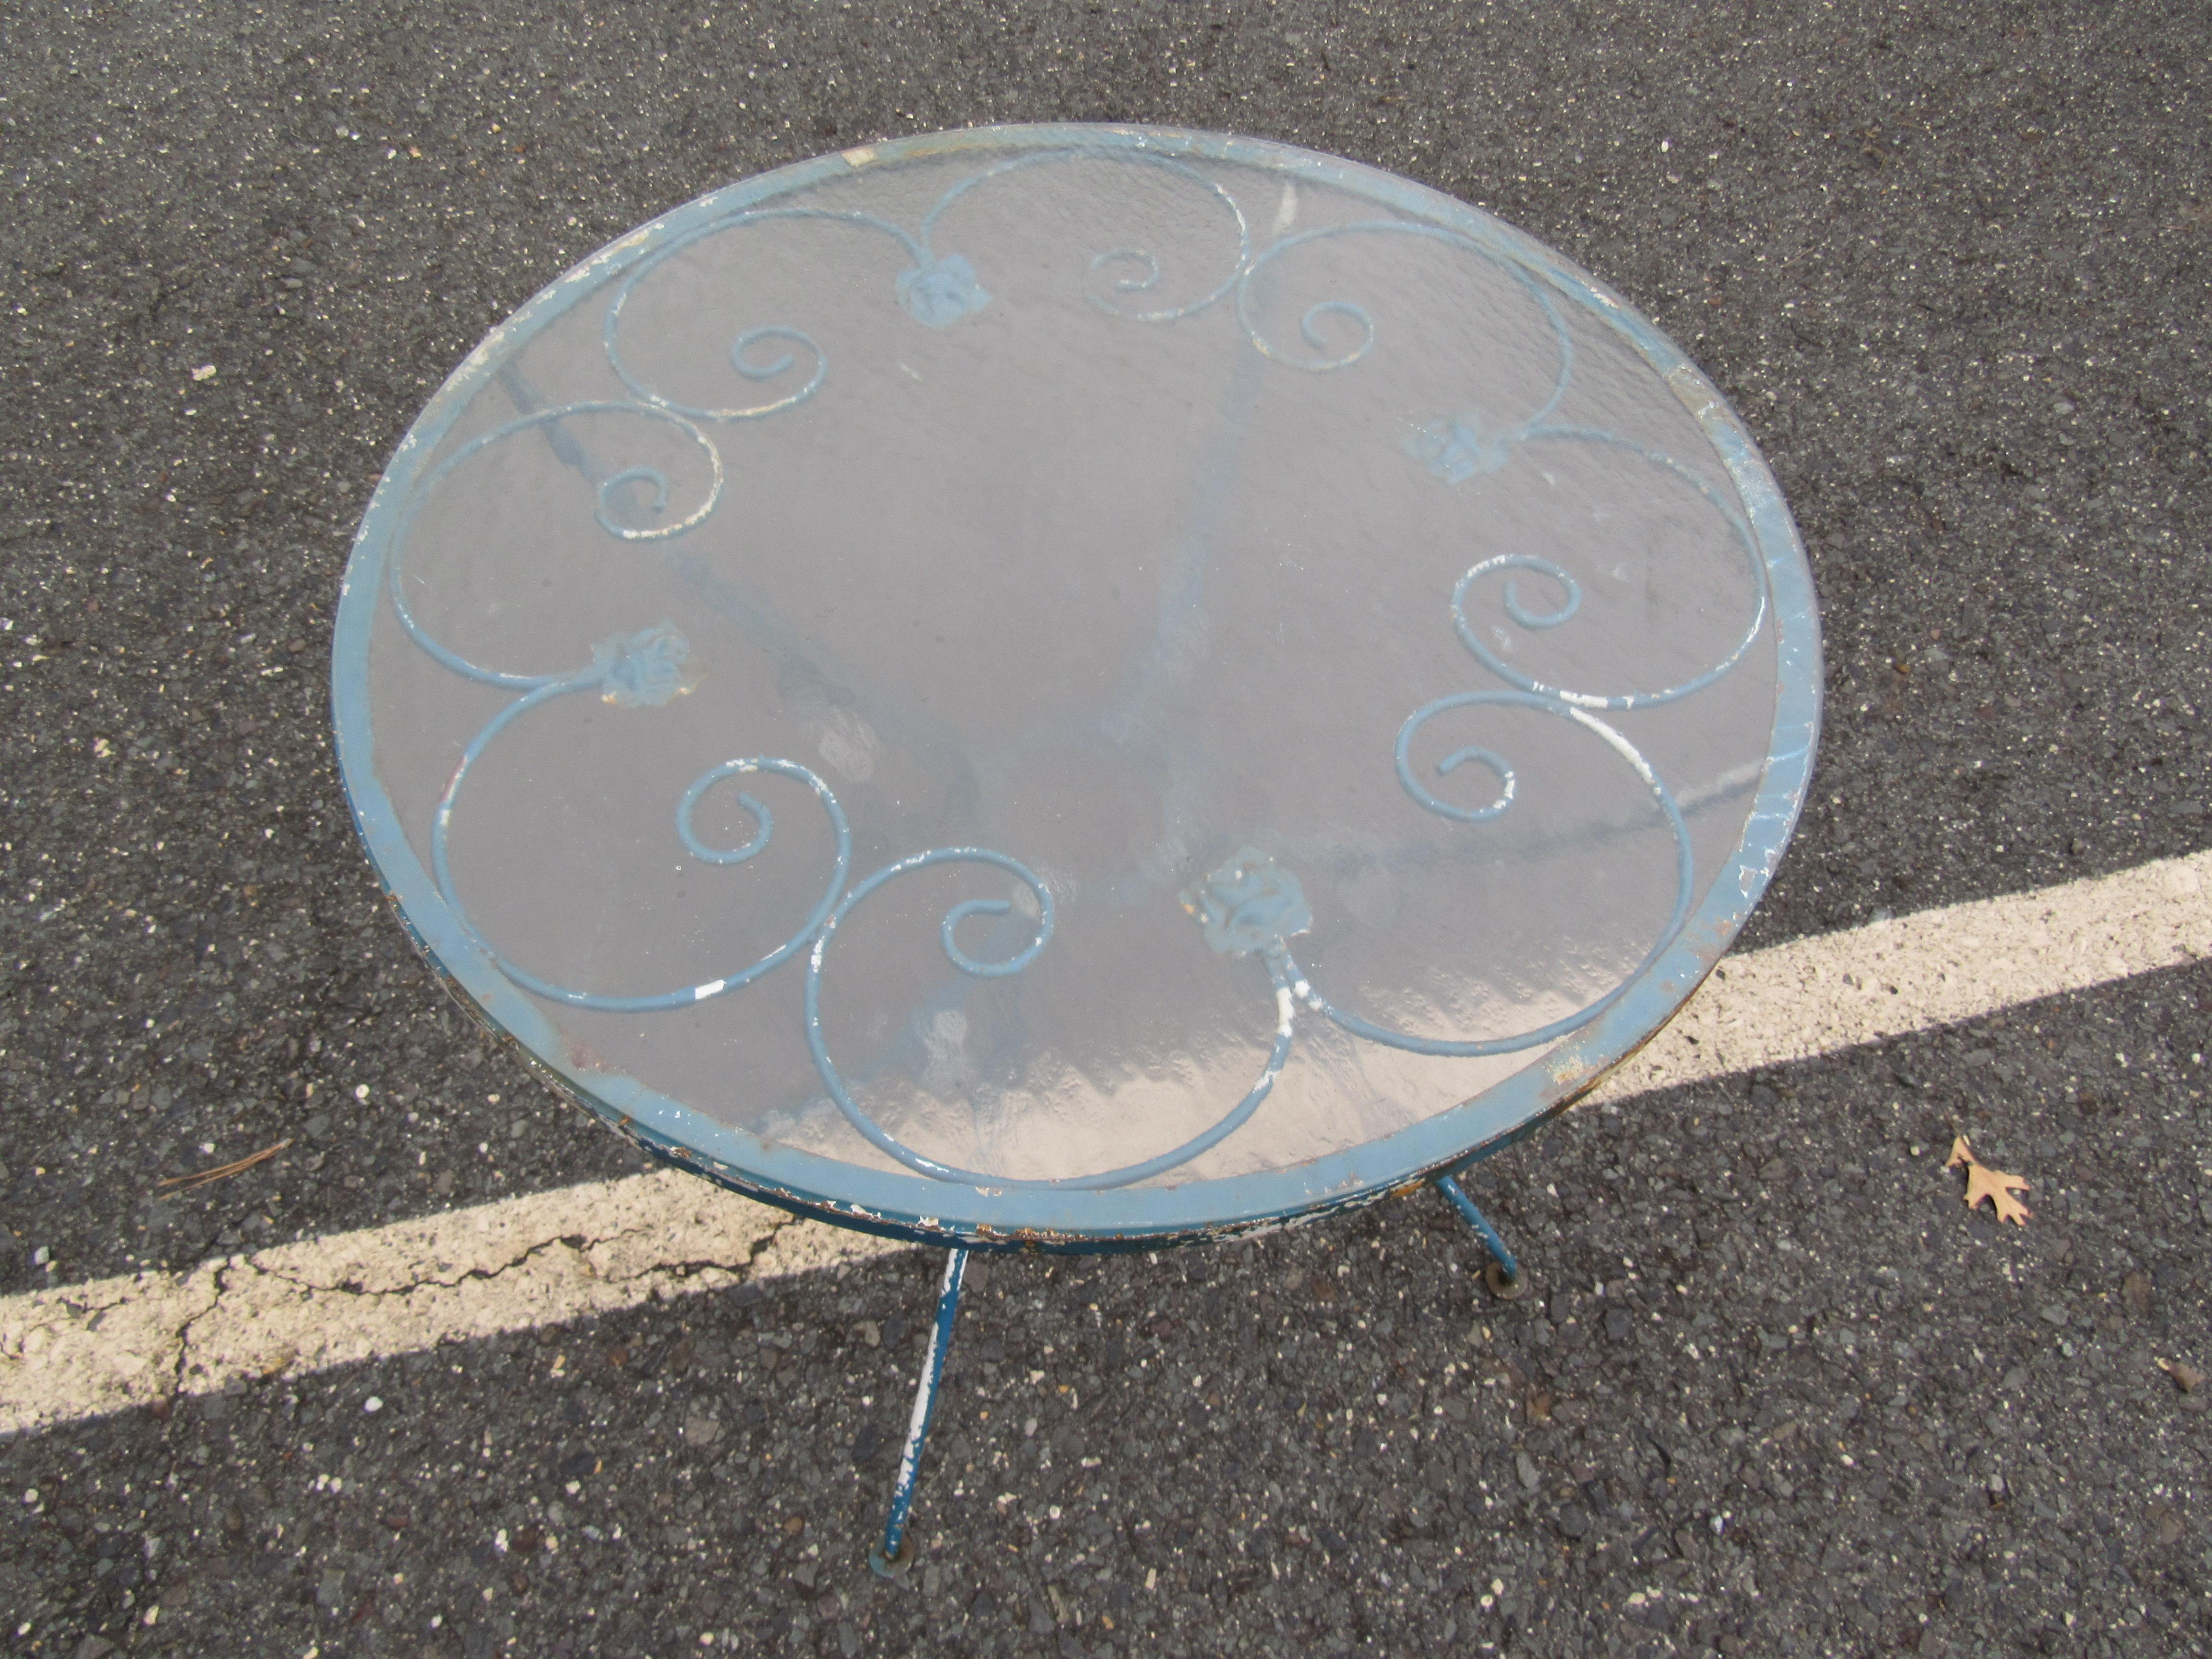 Stylish vintage patio table. Ornate accents span the base and the tabletop. Sturdy iron construction. An excellent addition to any outdoor/patio area. Please confirm item location with dealer (NJ or NY).